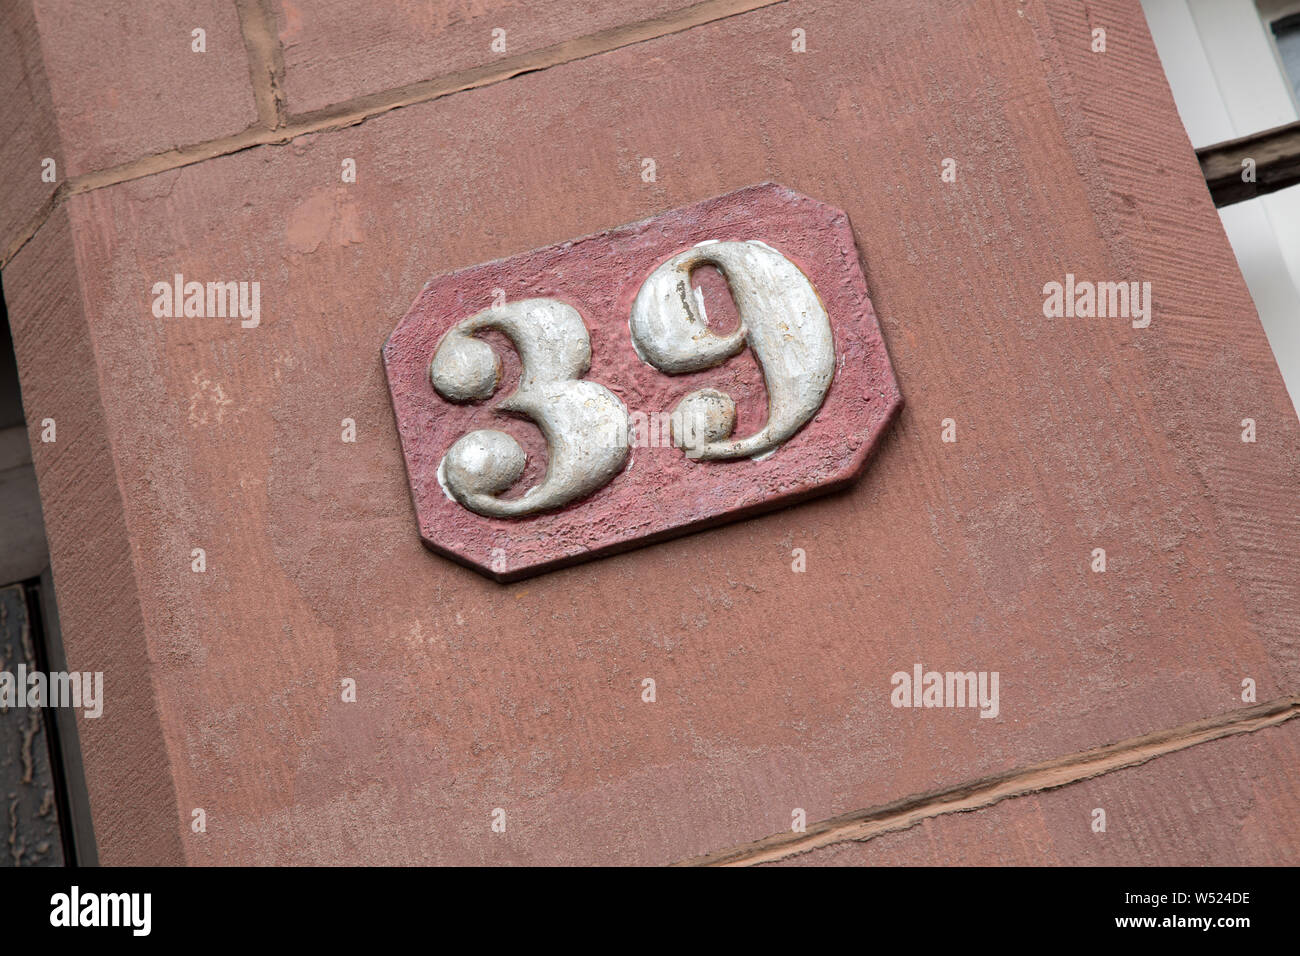 Number Thirty-nine on Building Facade Stock Photo